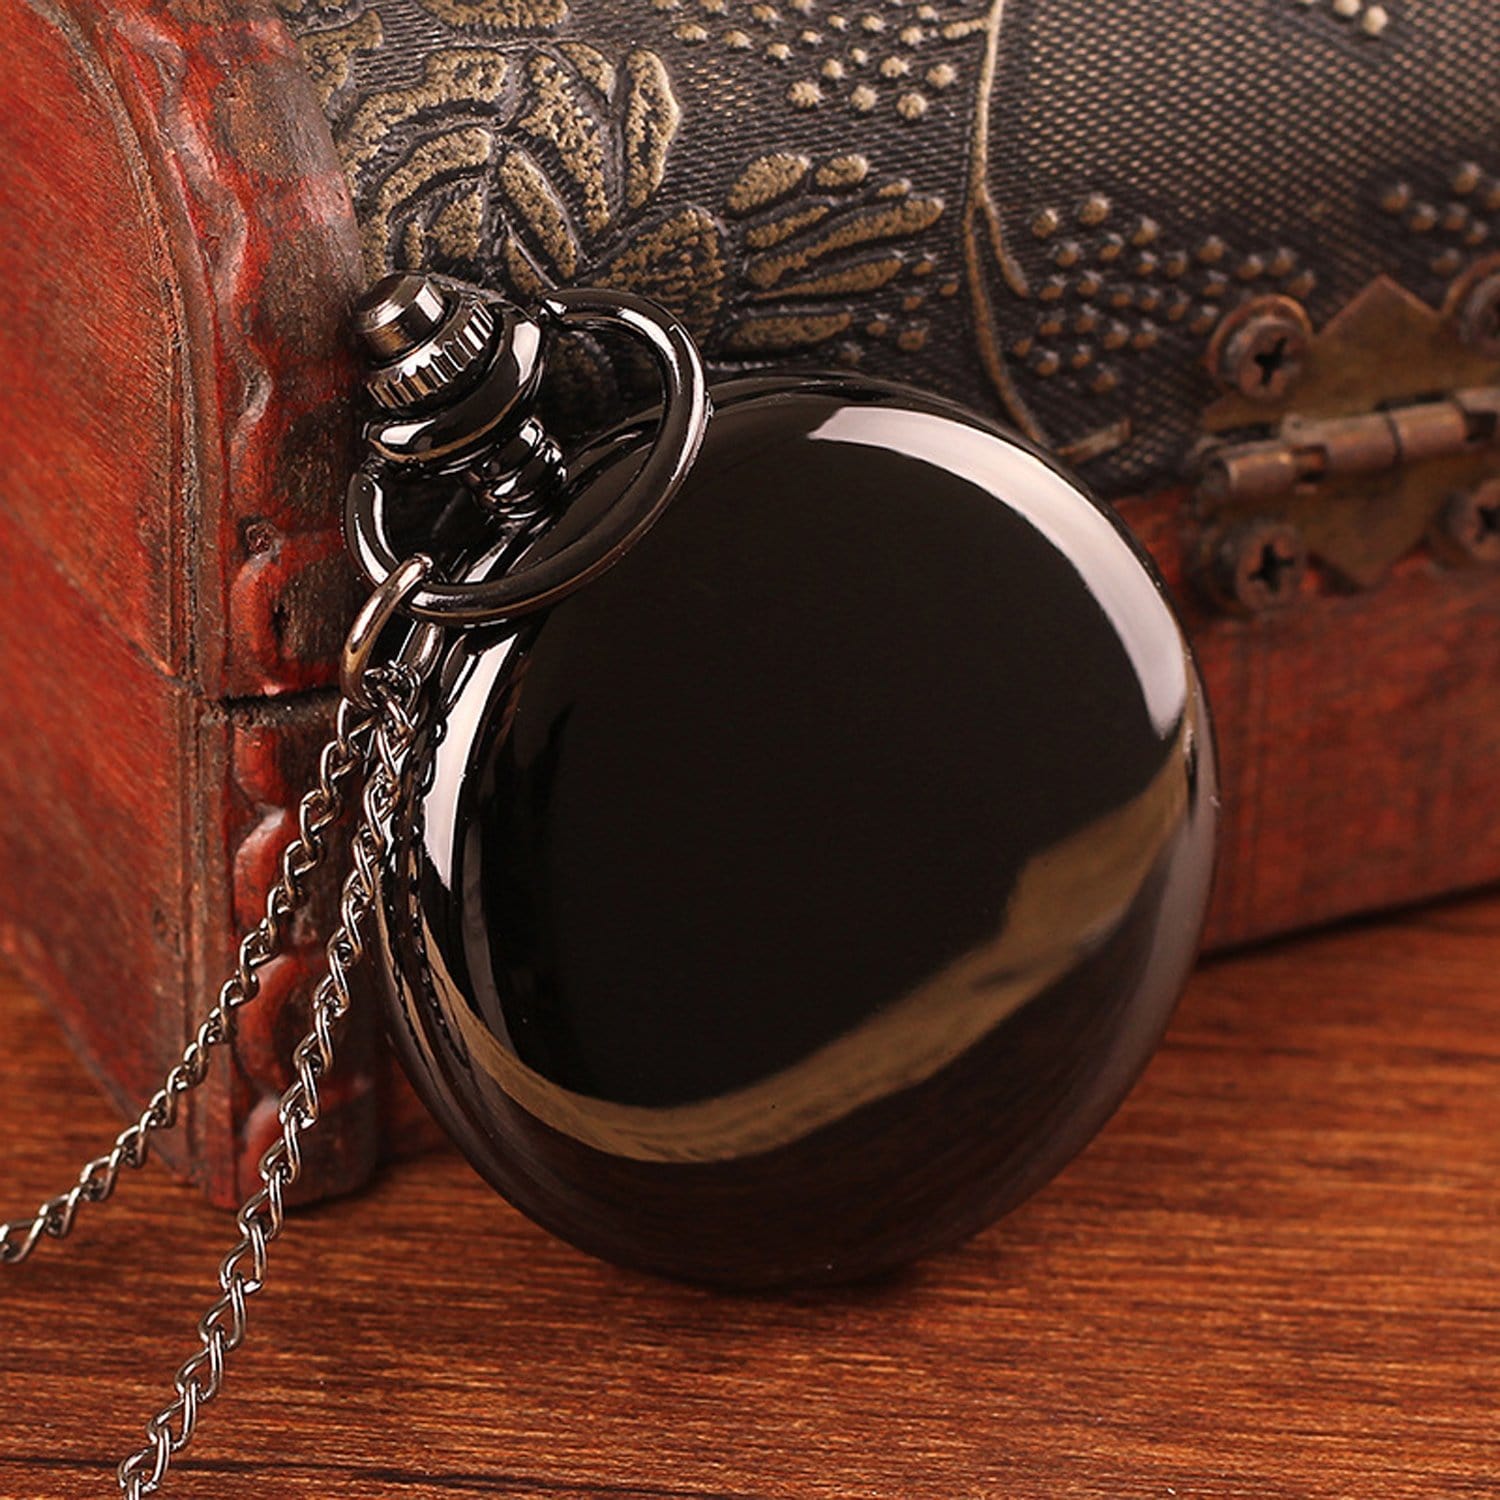 Pocket Watches To My Fiance - You And Me Have Been Side By Side Pocket Watch GiveMe-Gifts